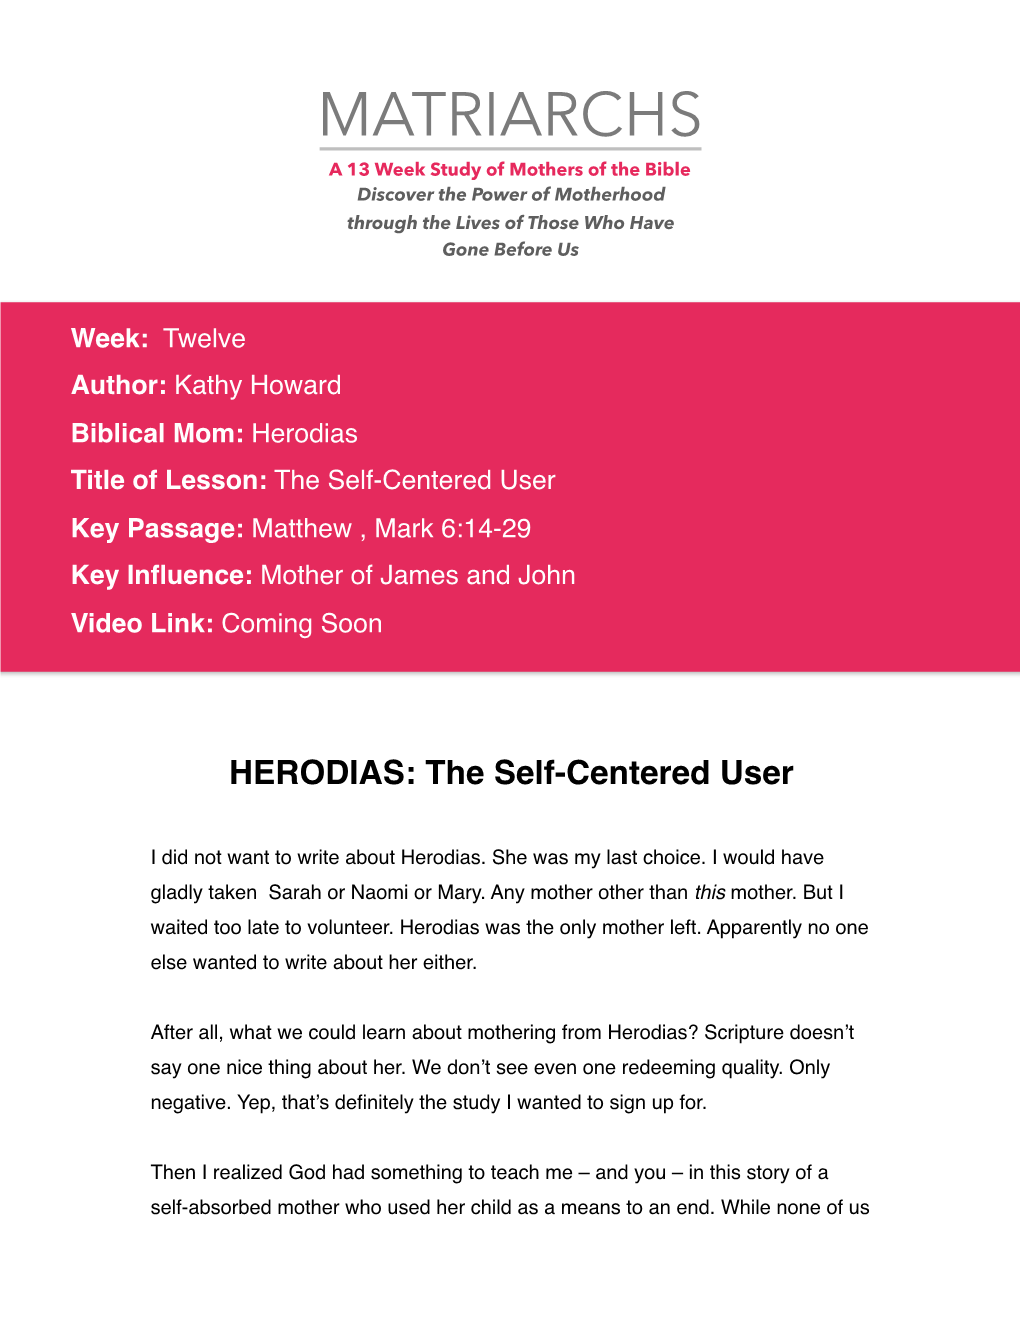 Herodias Title of Lesson: the Self-Centered User Key Passage: Matthew , Mark 6:14-29 Key Inﬂuence: Mother of James and John Video Link: Coming Soon